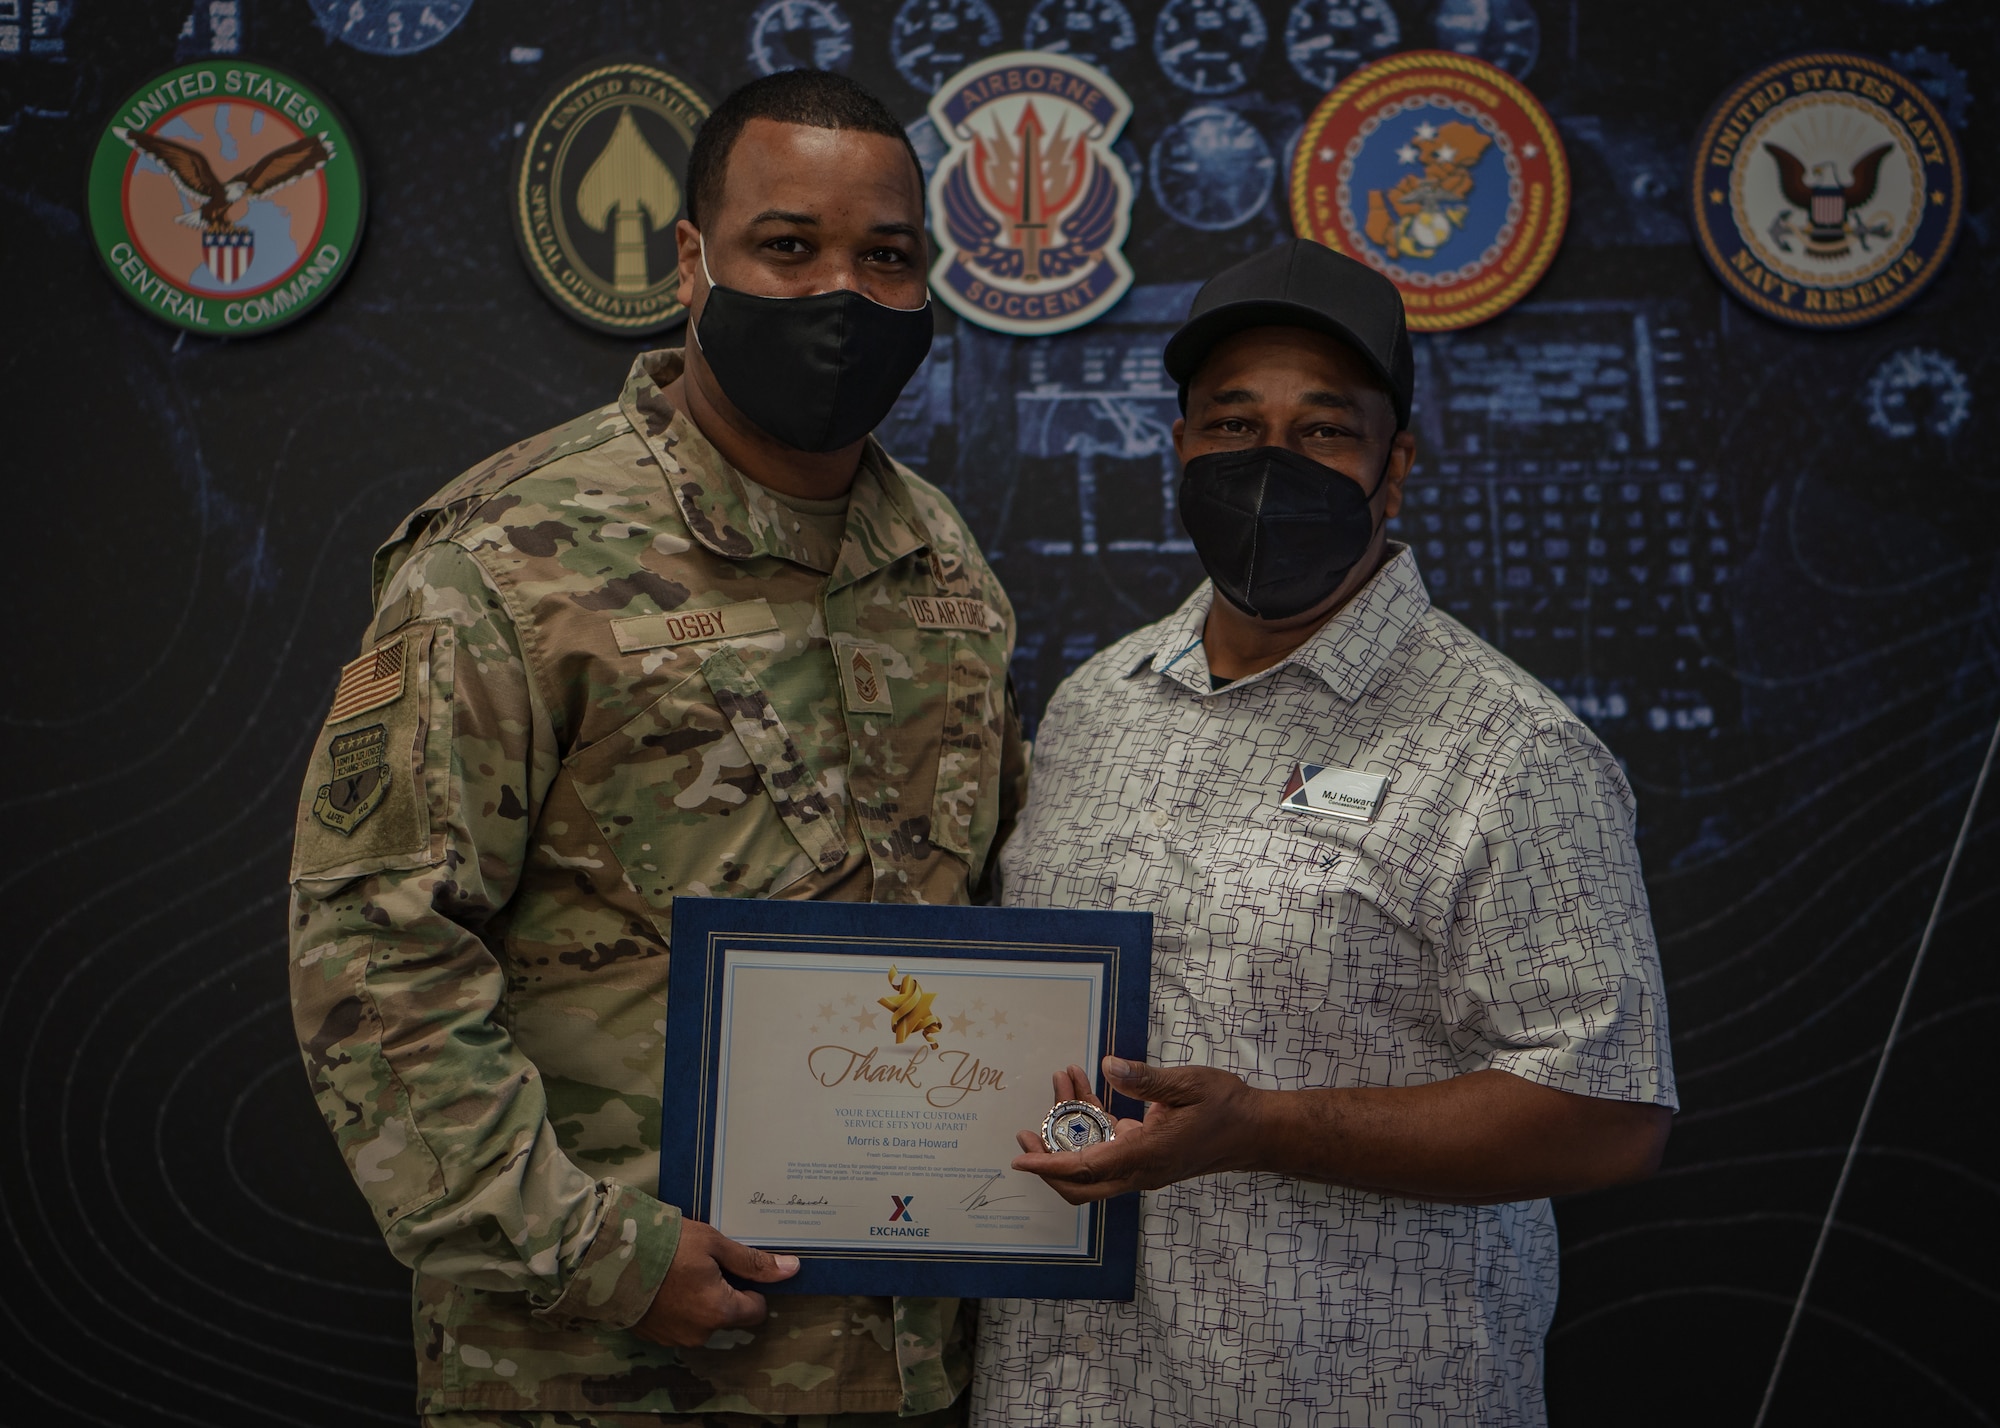 U.S. Air Force Chief Master Sgt. Kevin Osby, Army and Air Force Exchange Service’s senior enlisted advisor, awards Morris Howard for his excellence in customer service at the Exchange at MacDill Air Force Base, Florida, Feb. 22, 2022.